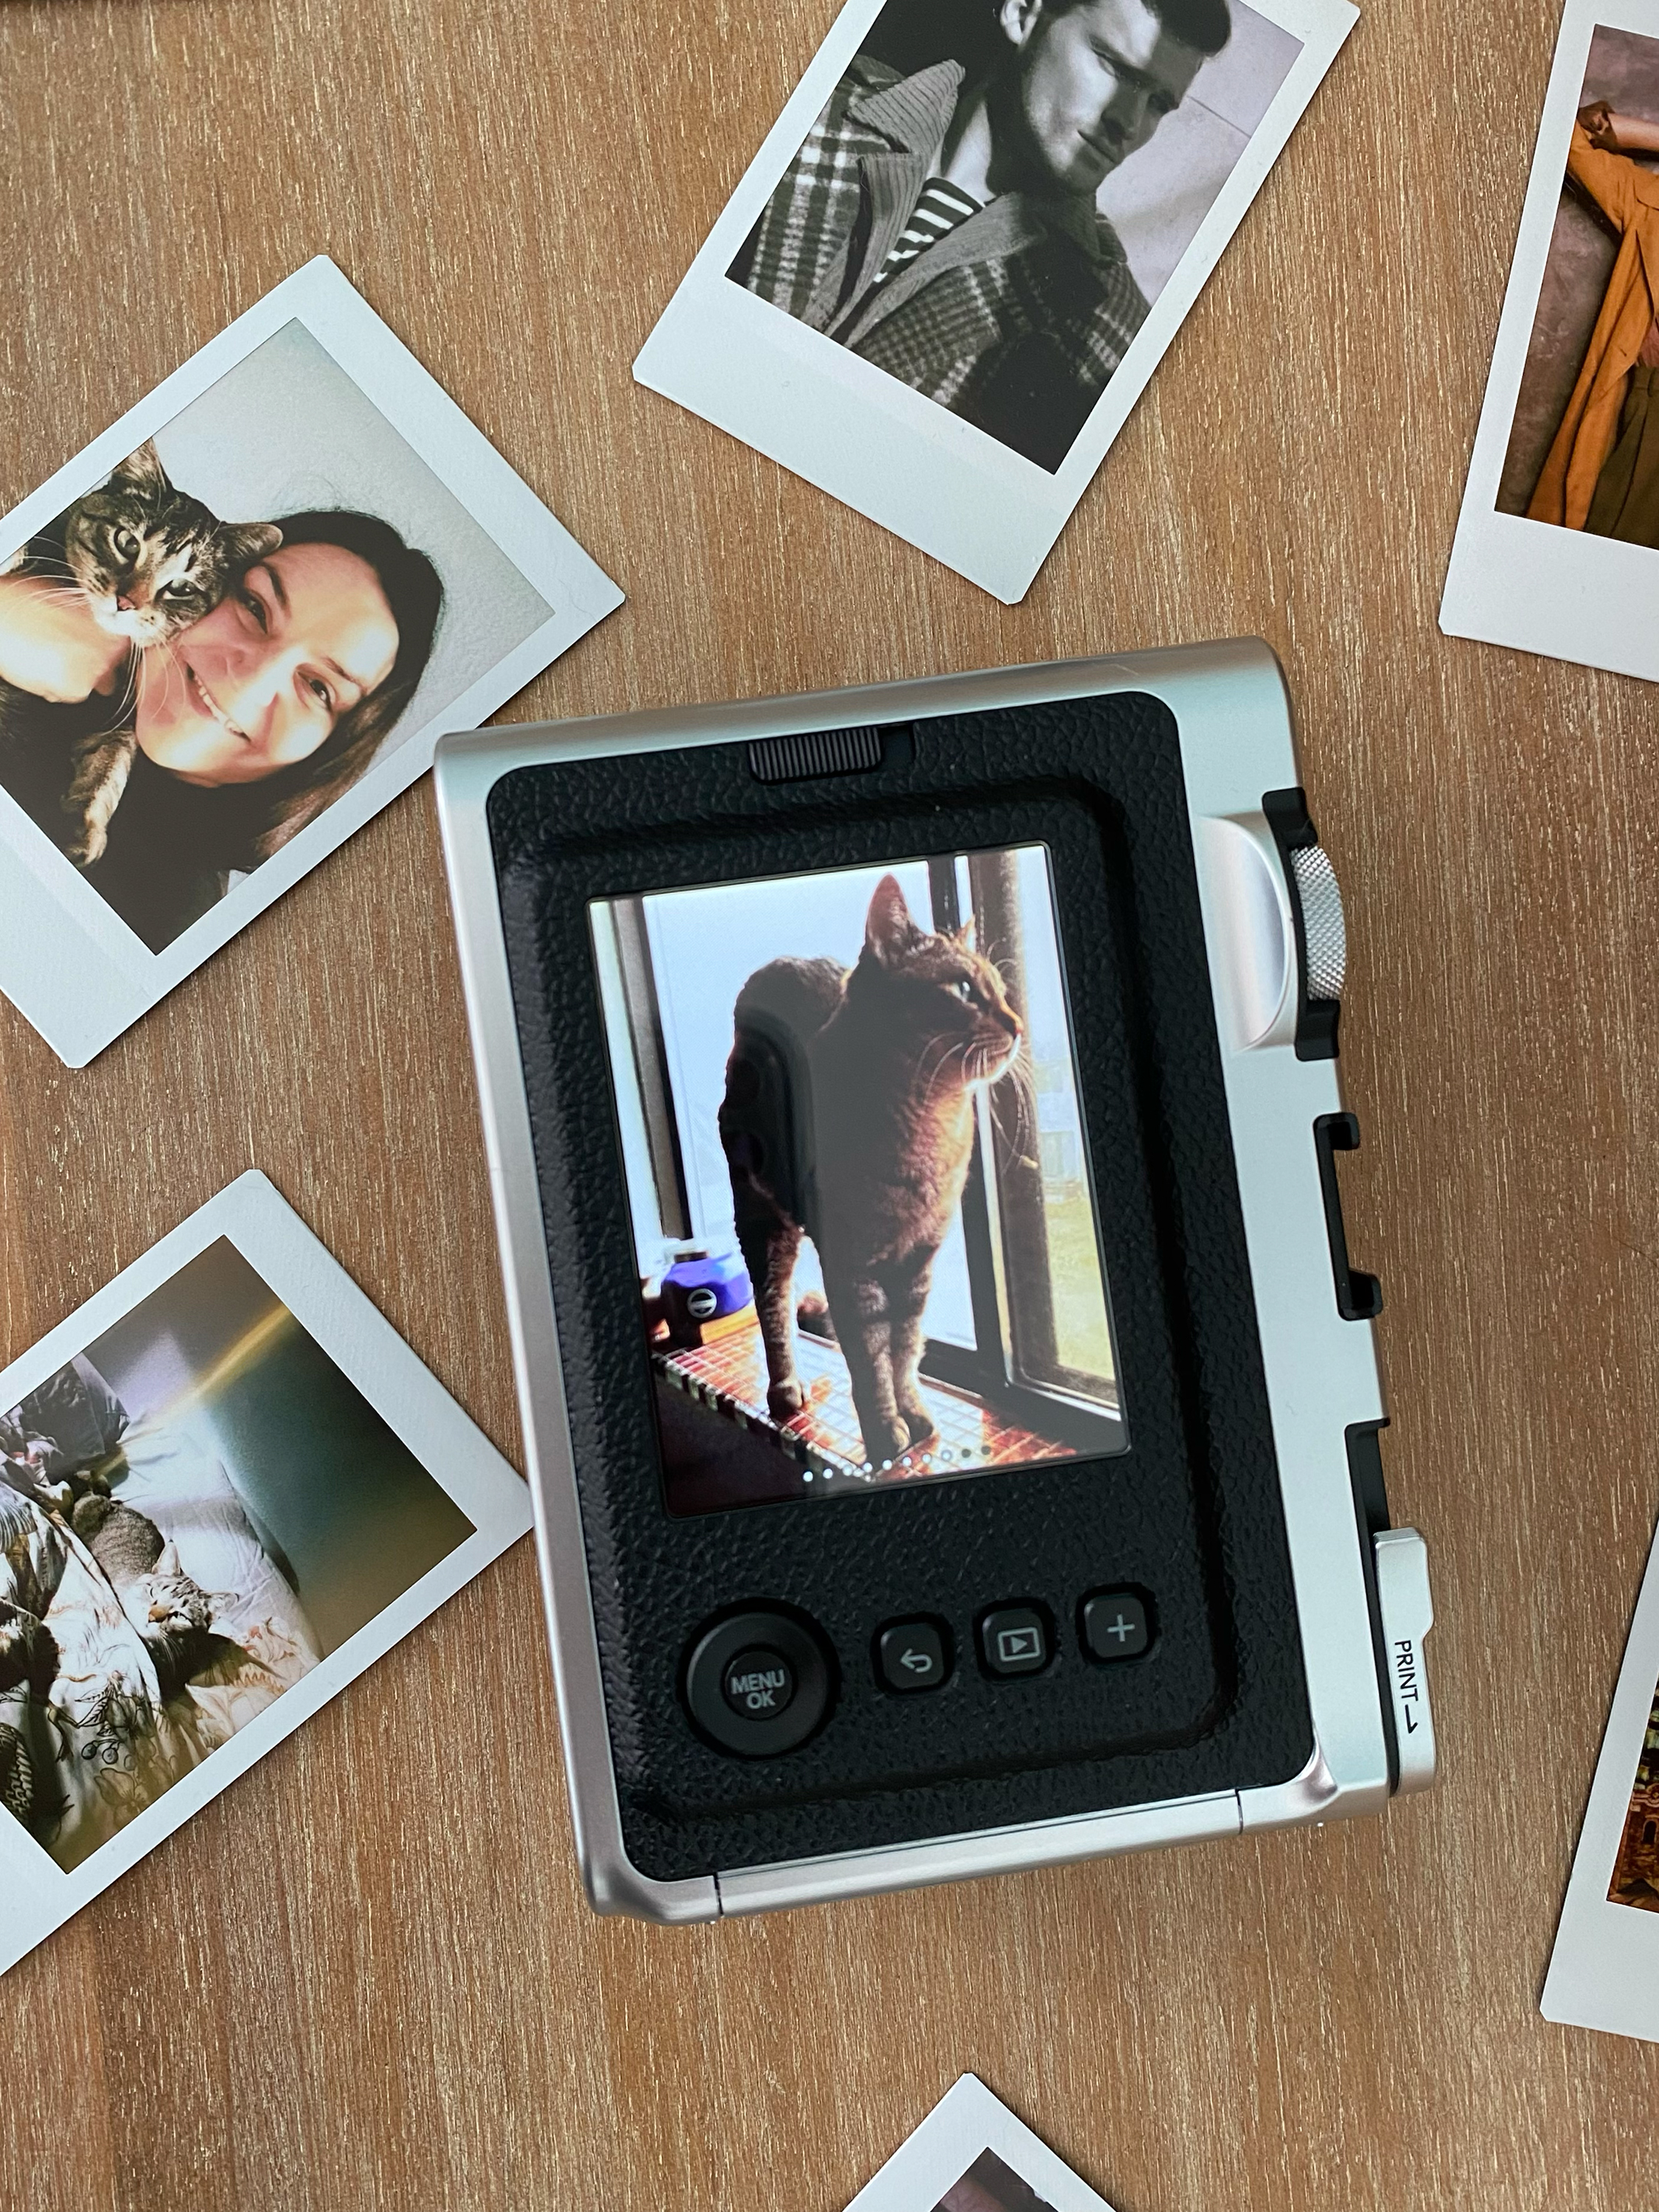 Brittany-Smith-The-Phoblographer-Instax-Mini-Evo-Product-Image-4754